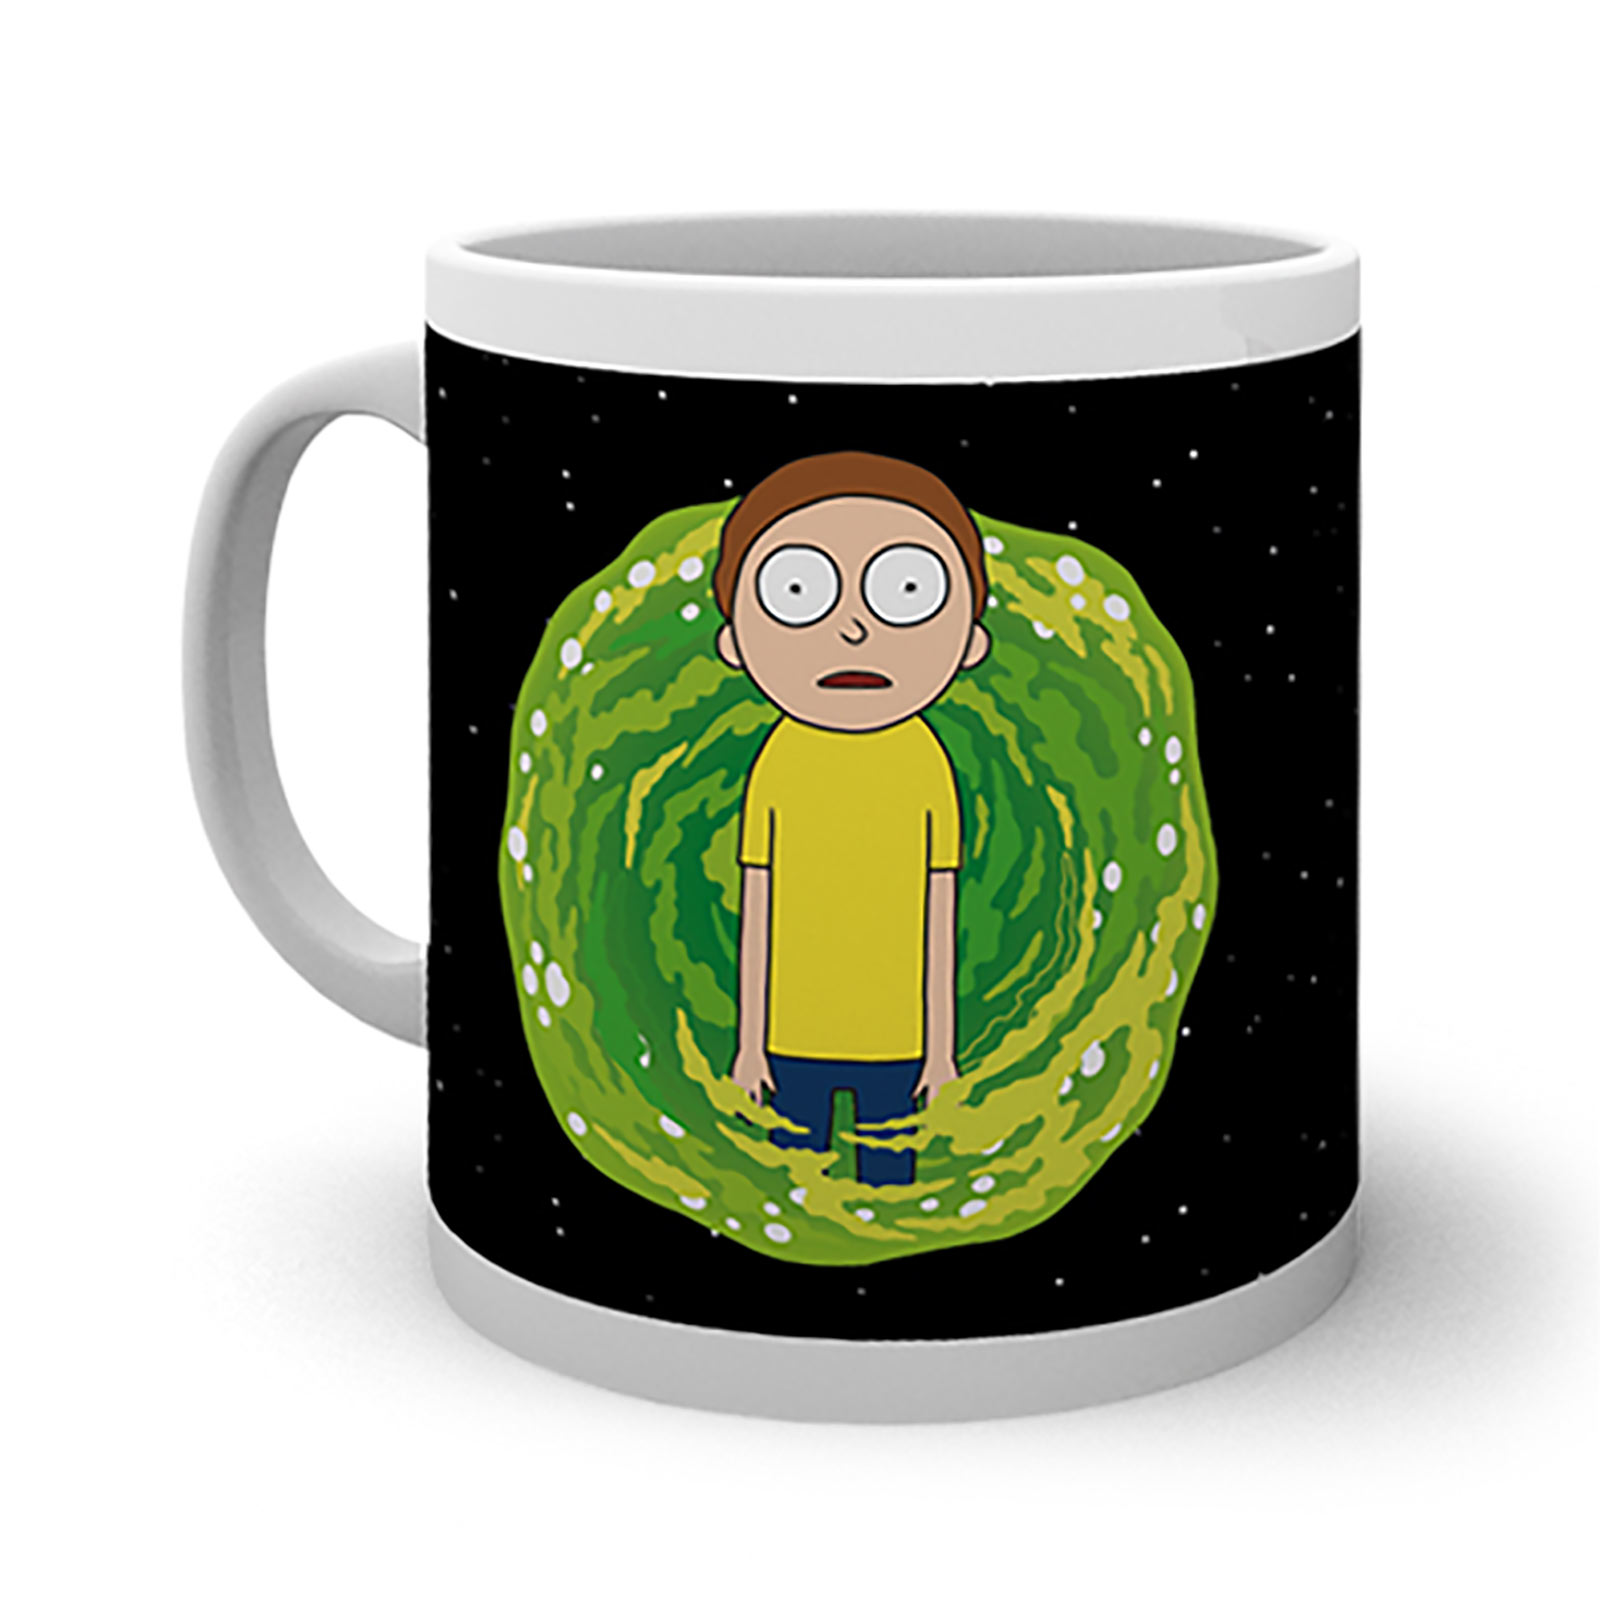 Rick and Morty - Nobody Exists Tasse